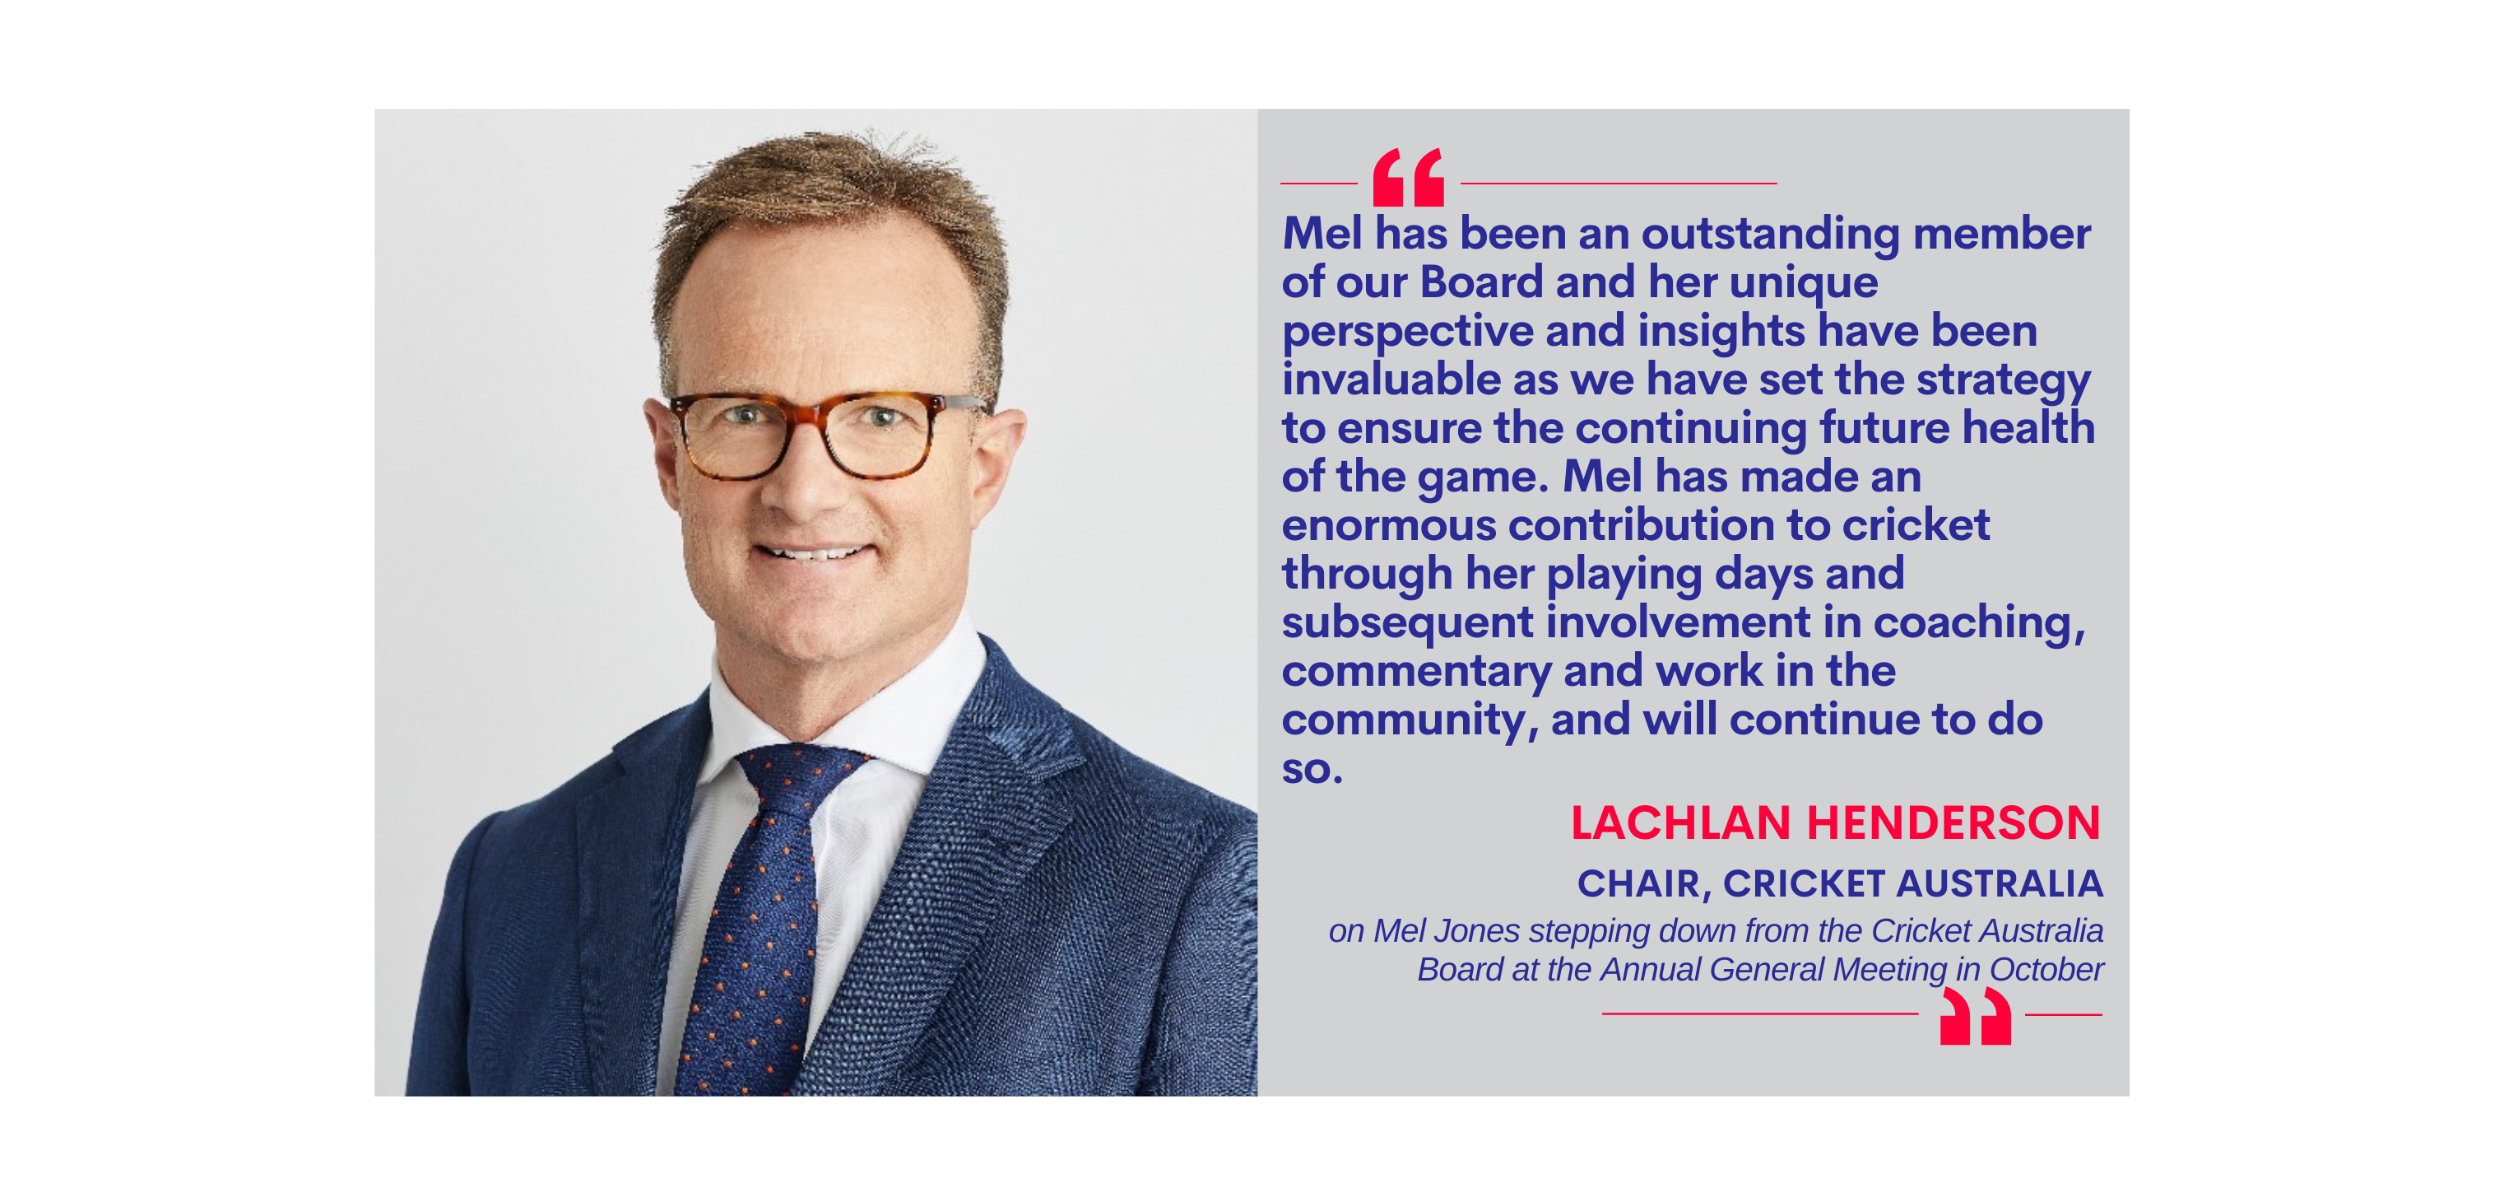 Lachlan Henderson, Chair, Cricket Australia on Mel Jones stepping down from the Cricket Australia Board at the Annual General Meeting in October